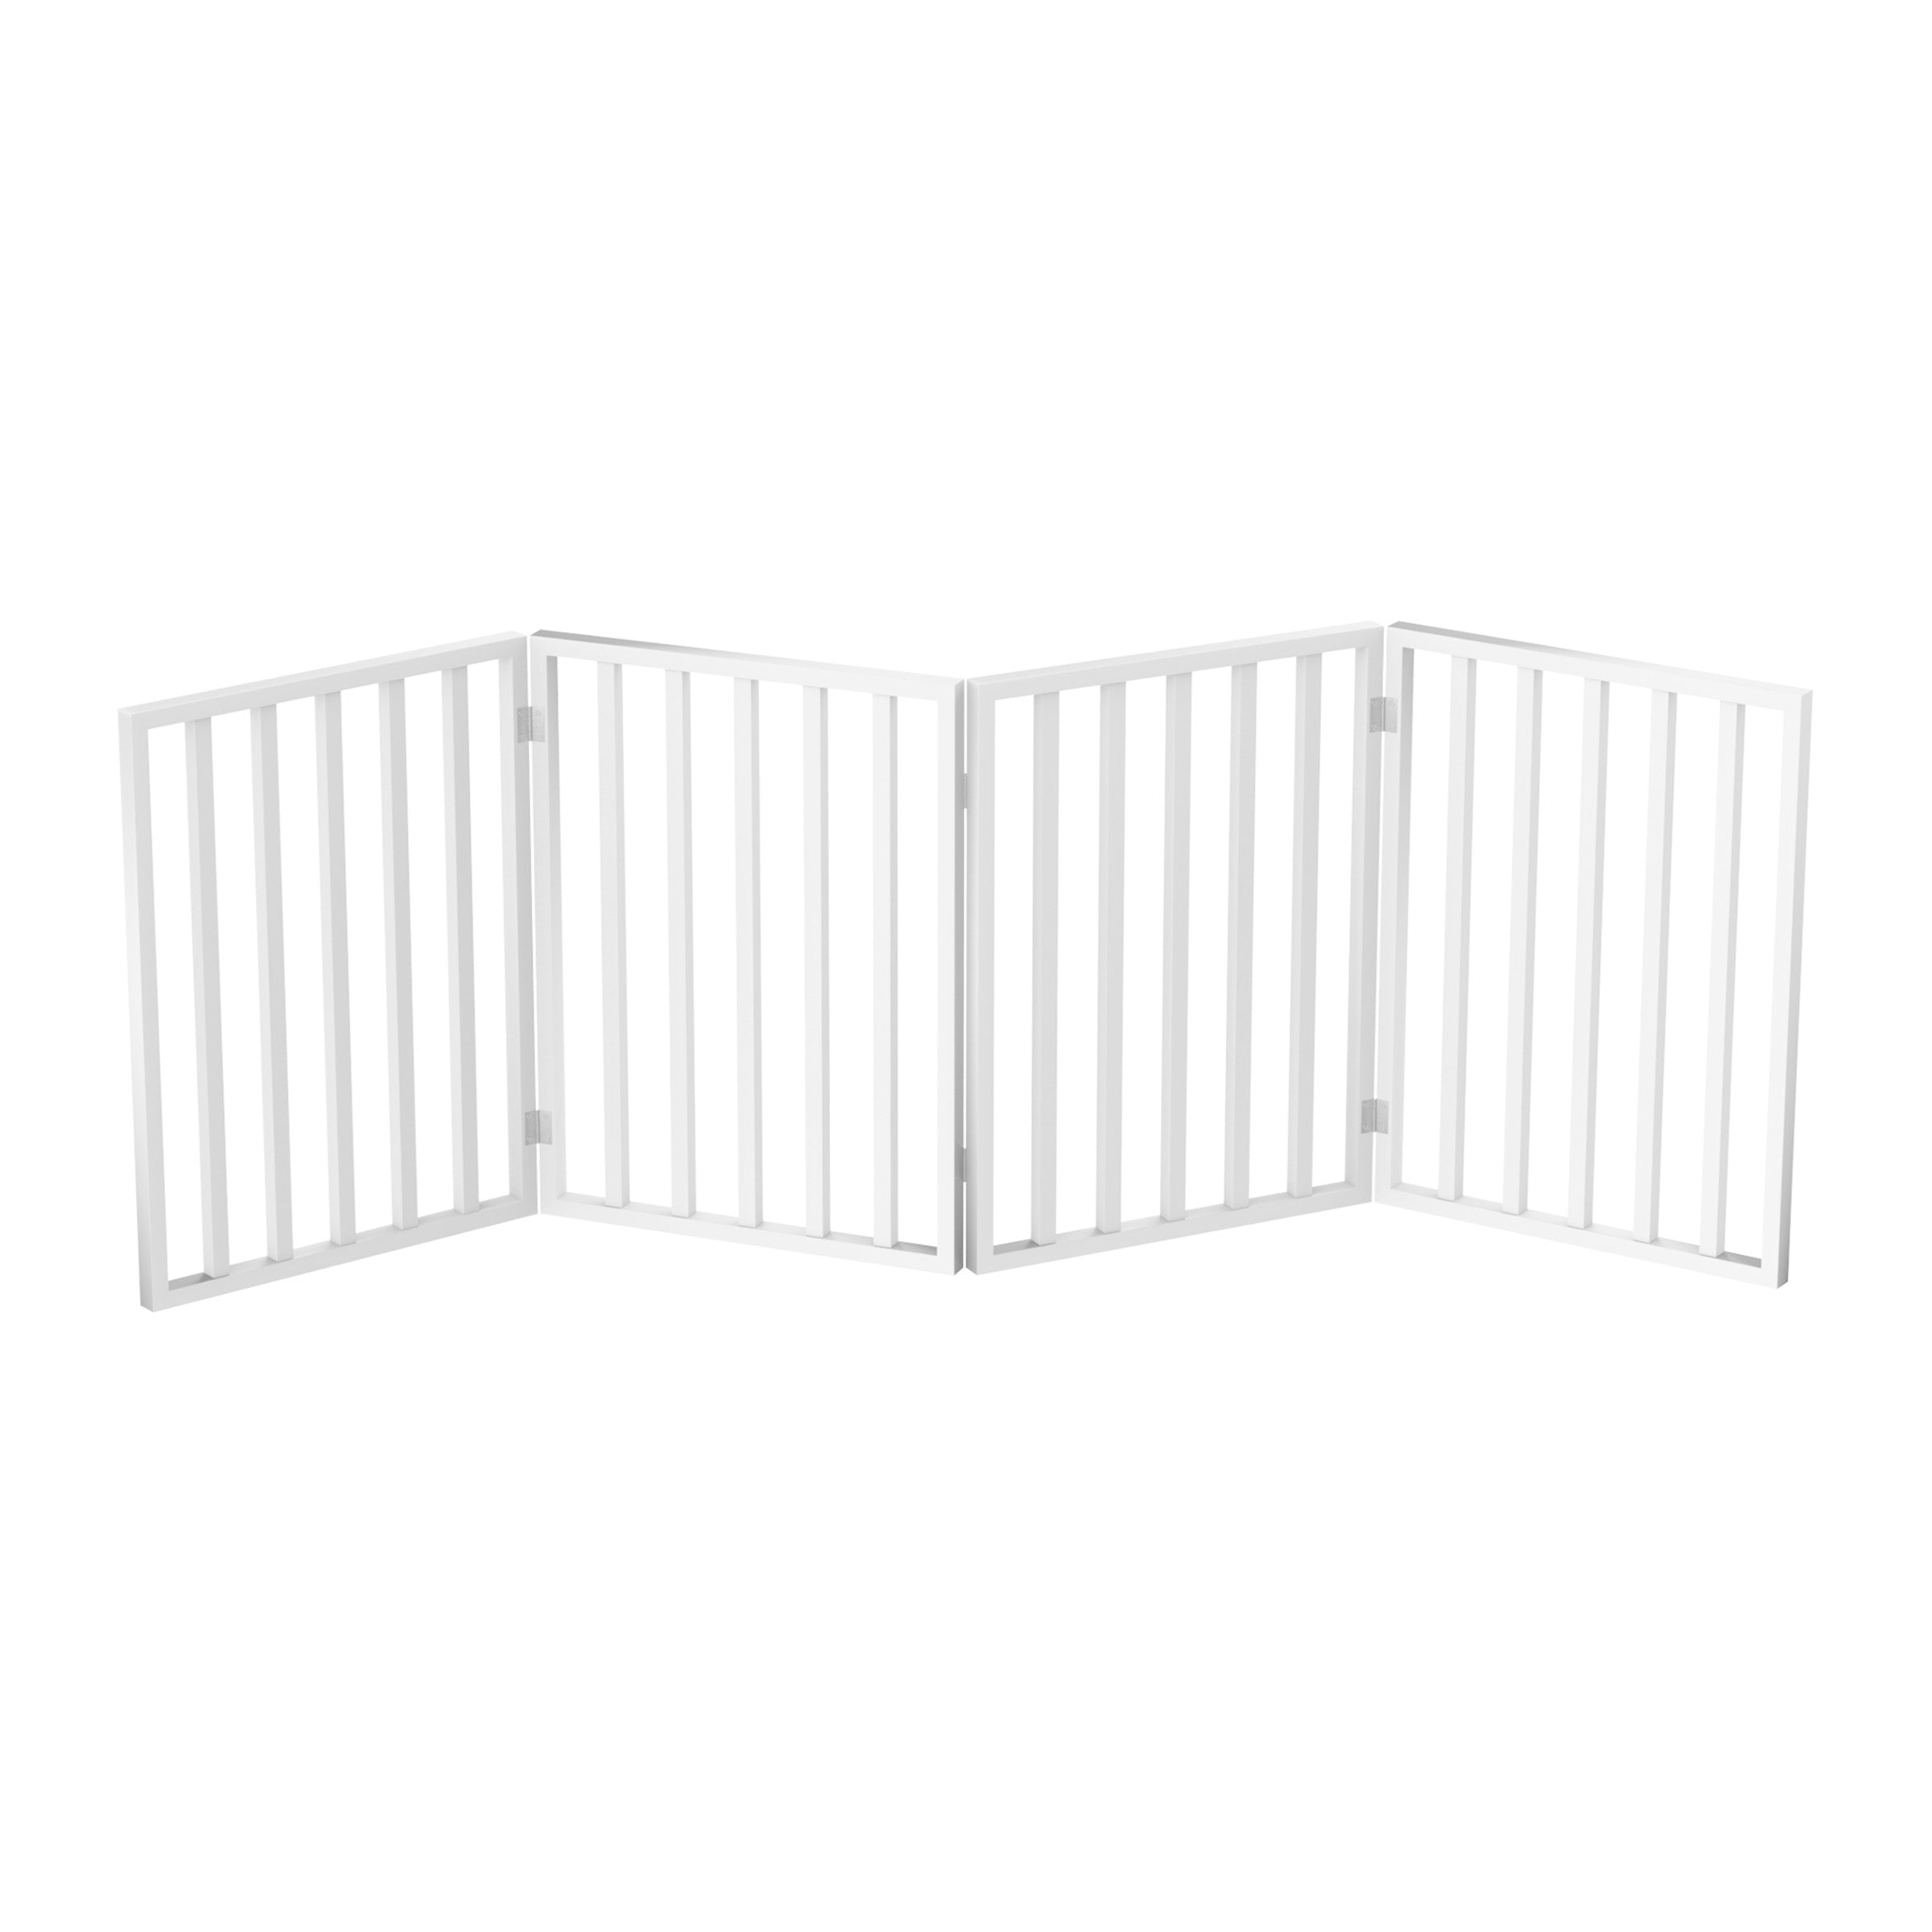 Pet Gate – Dog Gate for Doorways， Stairs or House – Freestanding， Folding， Accordion Style， Wooden Indoor Dog Fence by Petmaker (4 Panel， White)